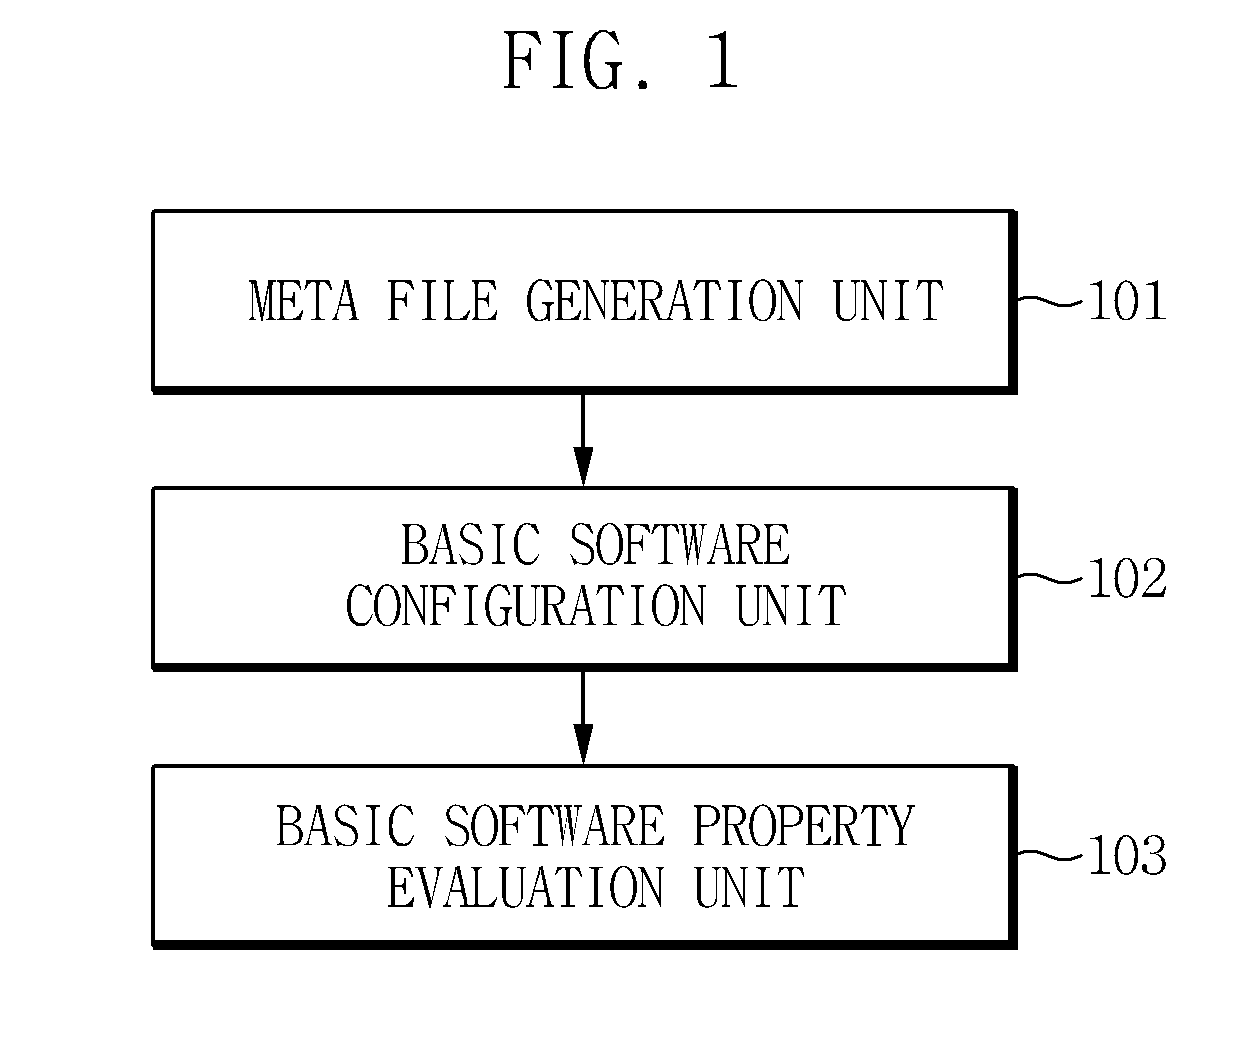 Apparatus and method for evaluating autosar meta file-based basic software properties